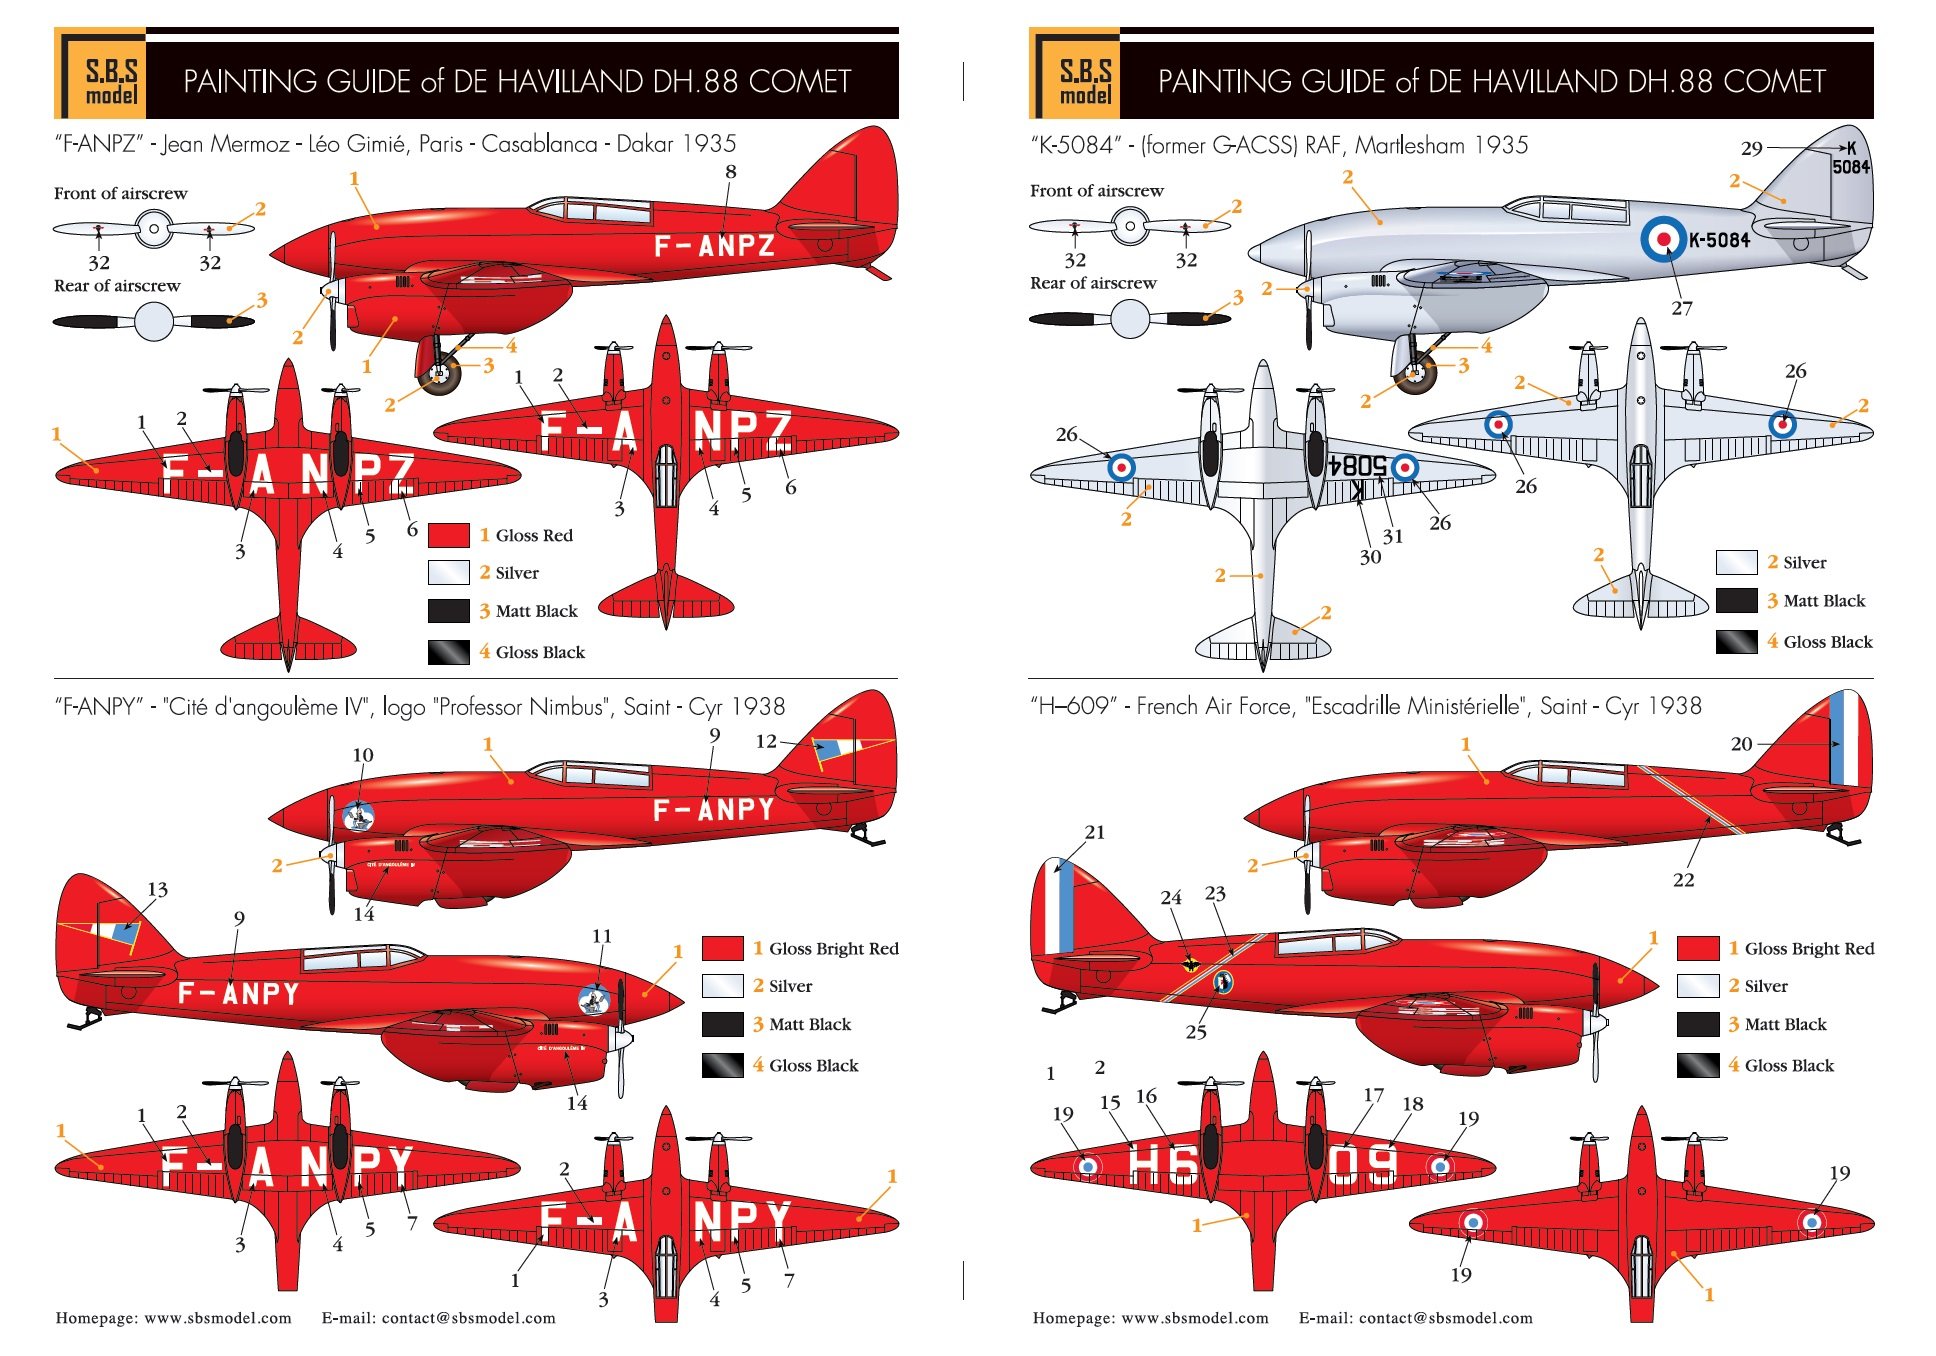 1/72 De Havilland DH-88 Comet "French & RAF" Full Resin Kit - Click Image to Close